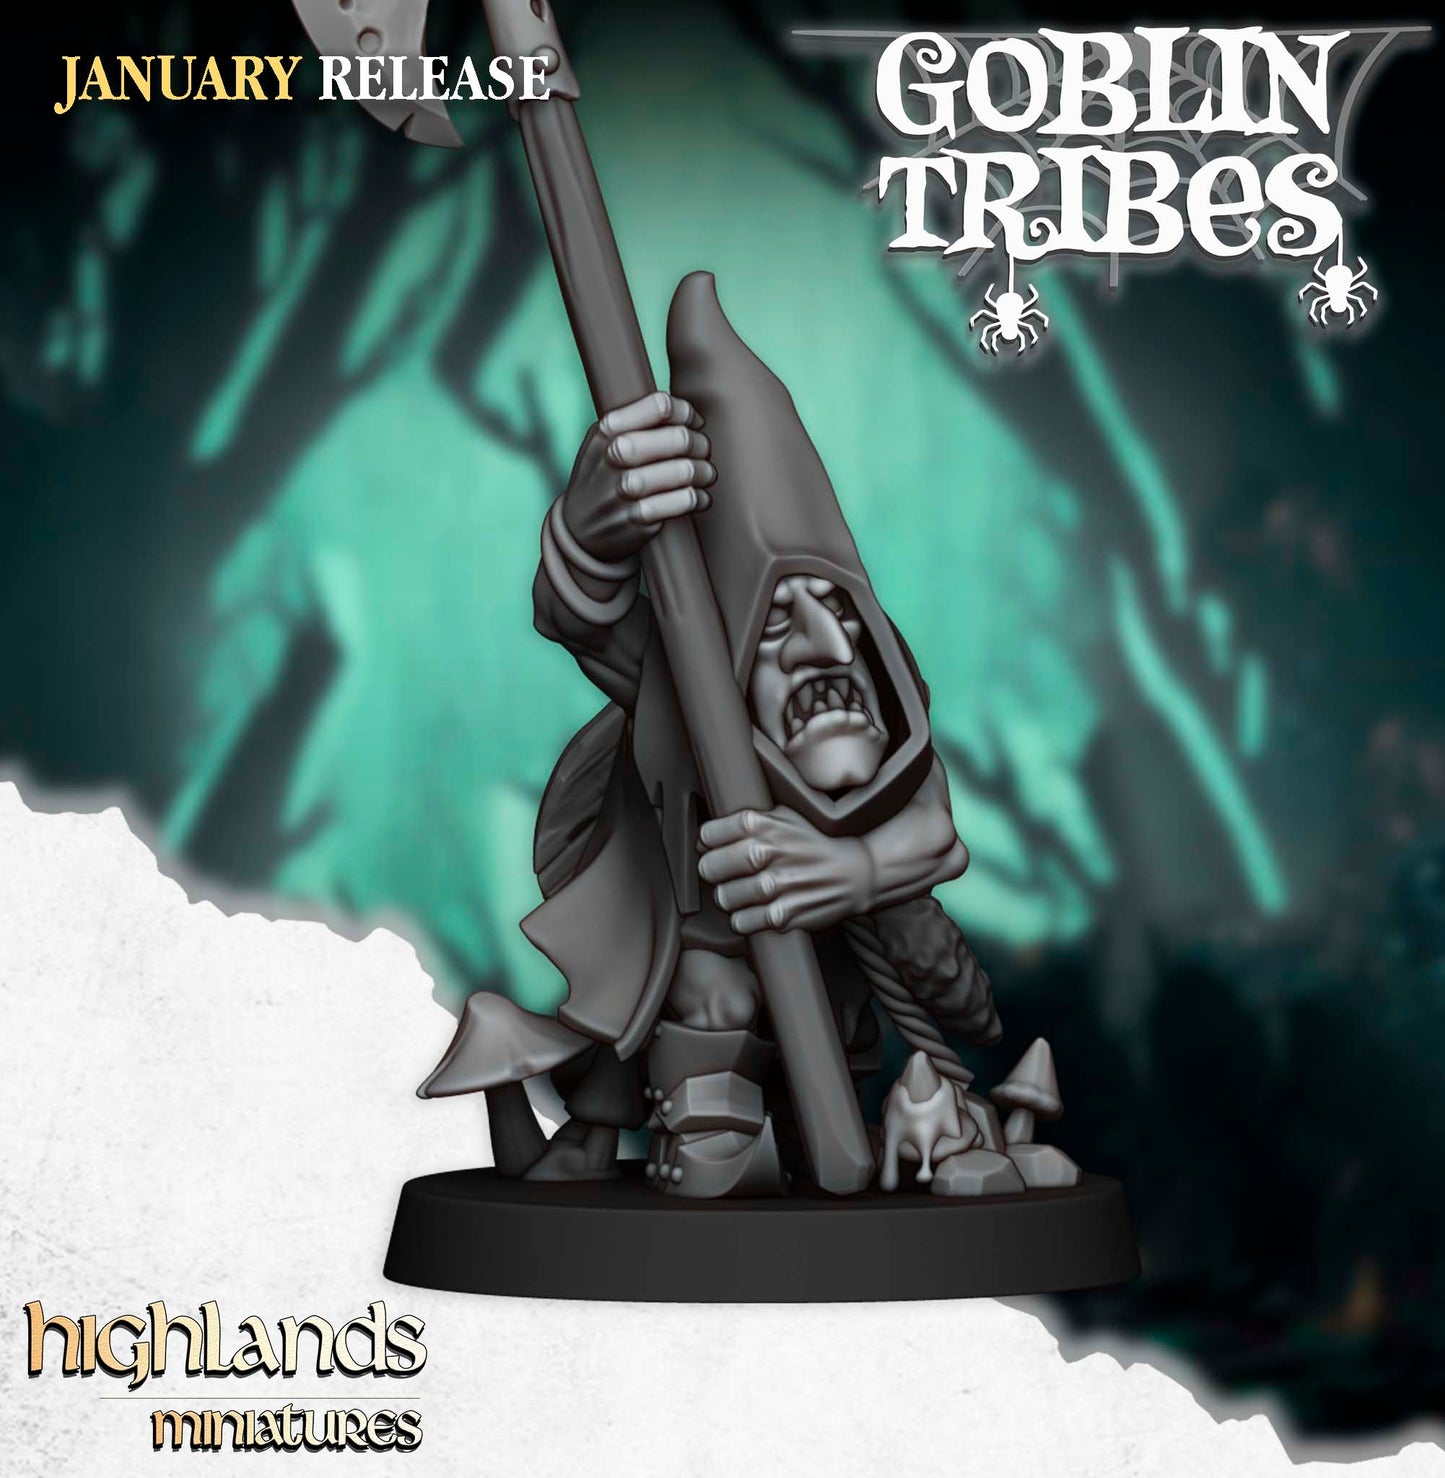 Swamp Goblins with Pikes by Highlands Miniatures